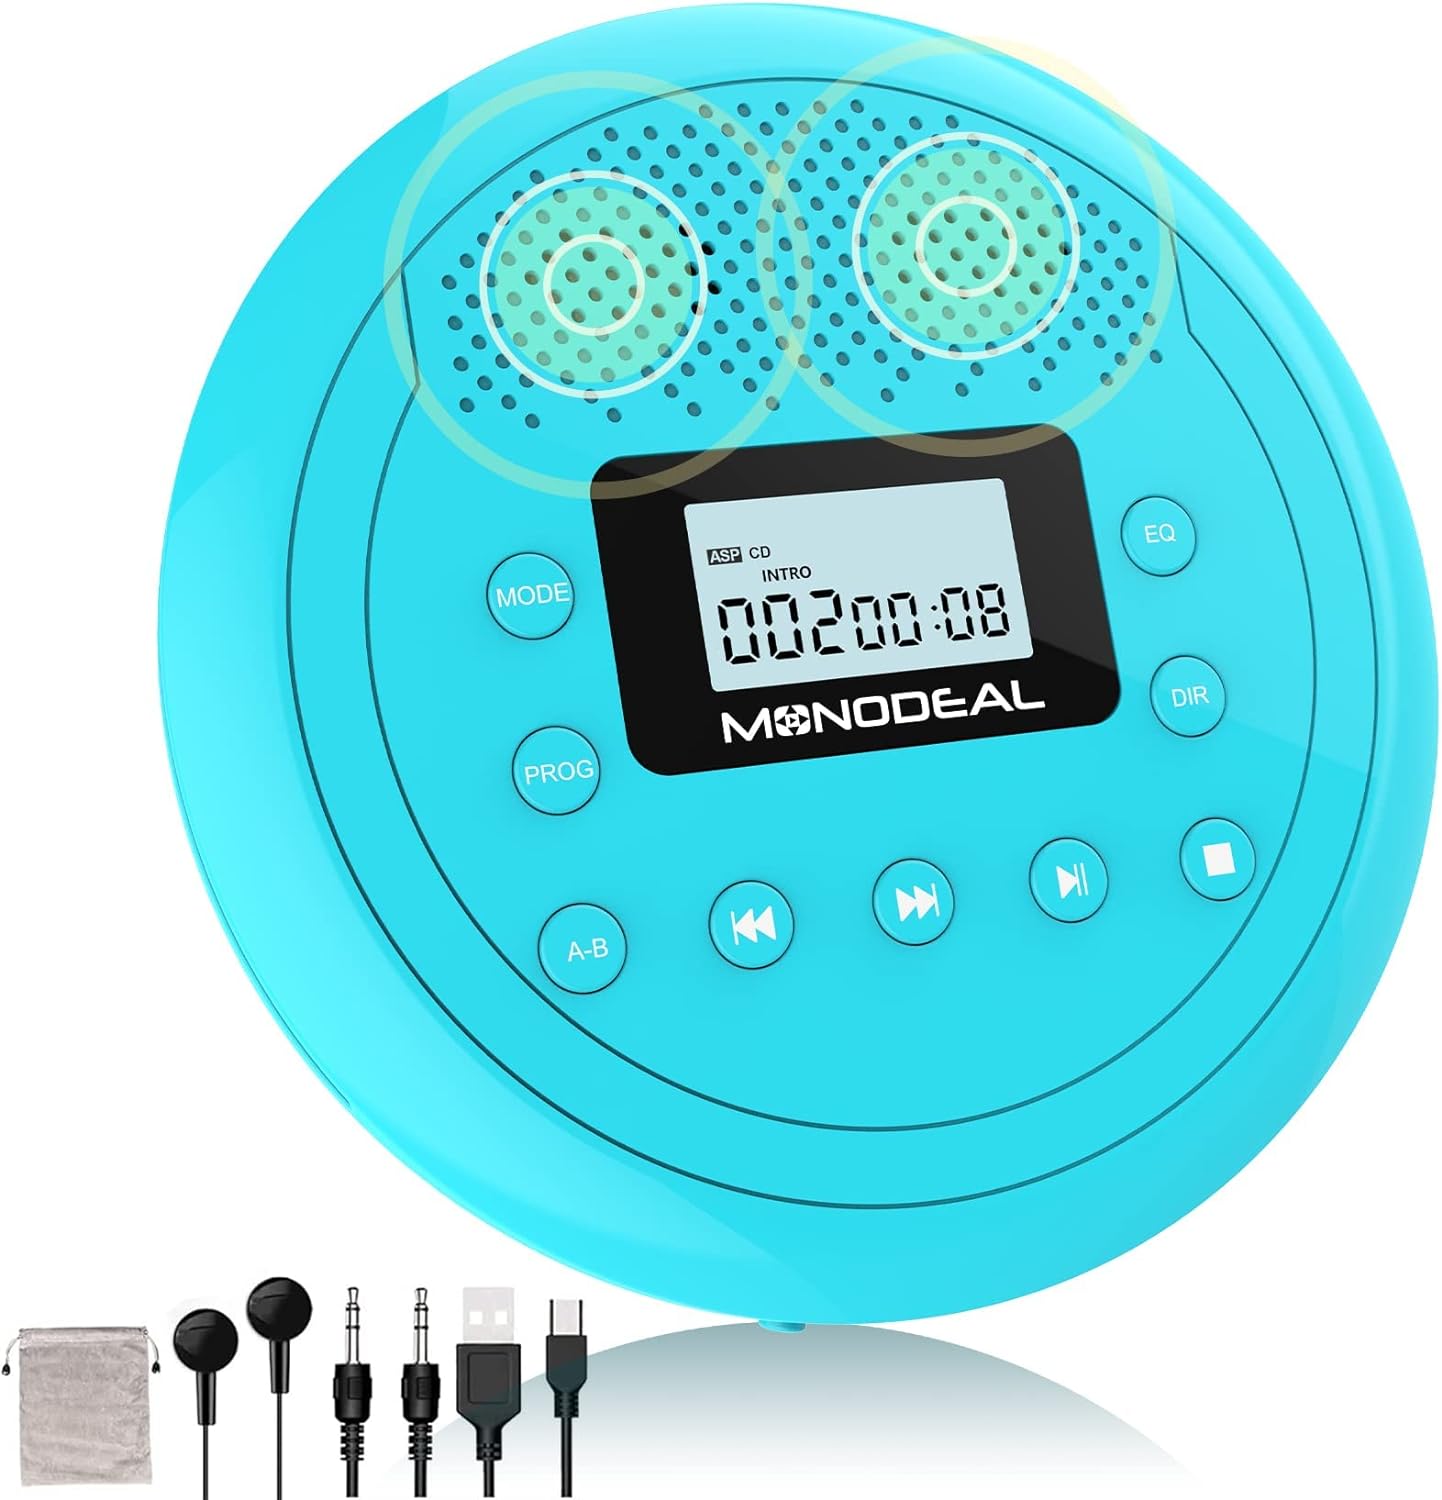 CD Player Portable | Speaker Built-in Rechargeable CD Player by Monodeal | Walkman CD Player for Car and Home, Kids, Anti-Skip CD Player with Headphones(Cyan-Blue)